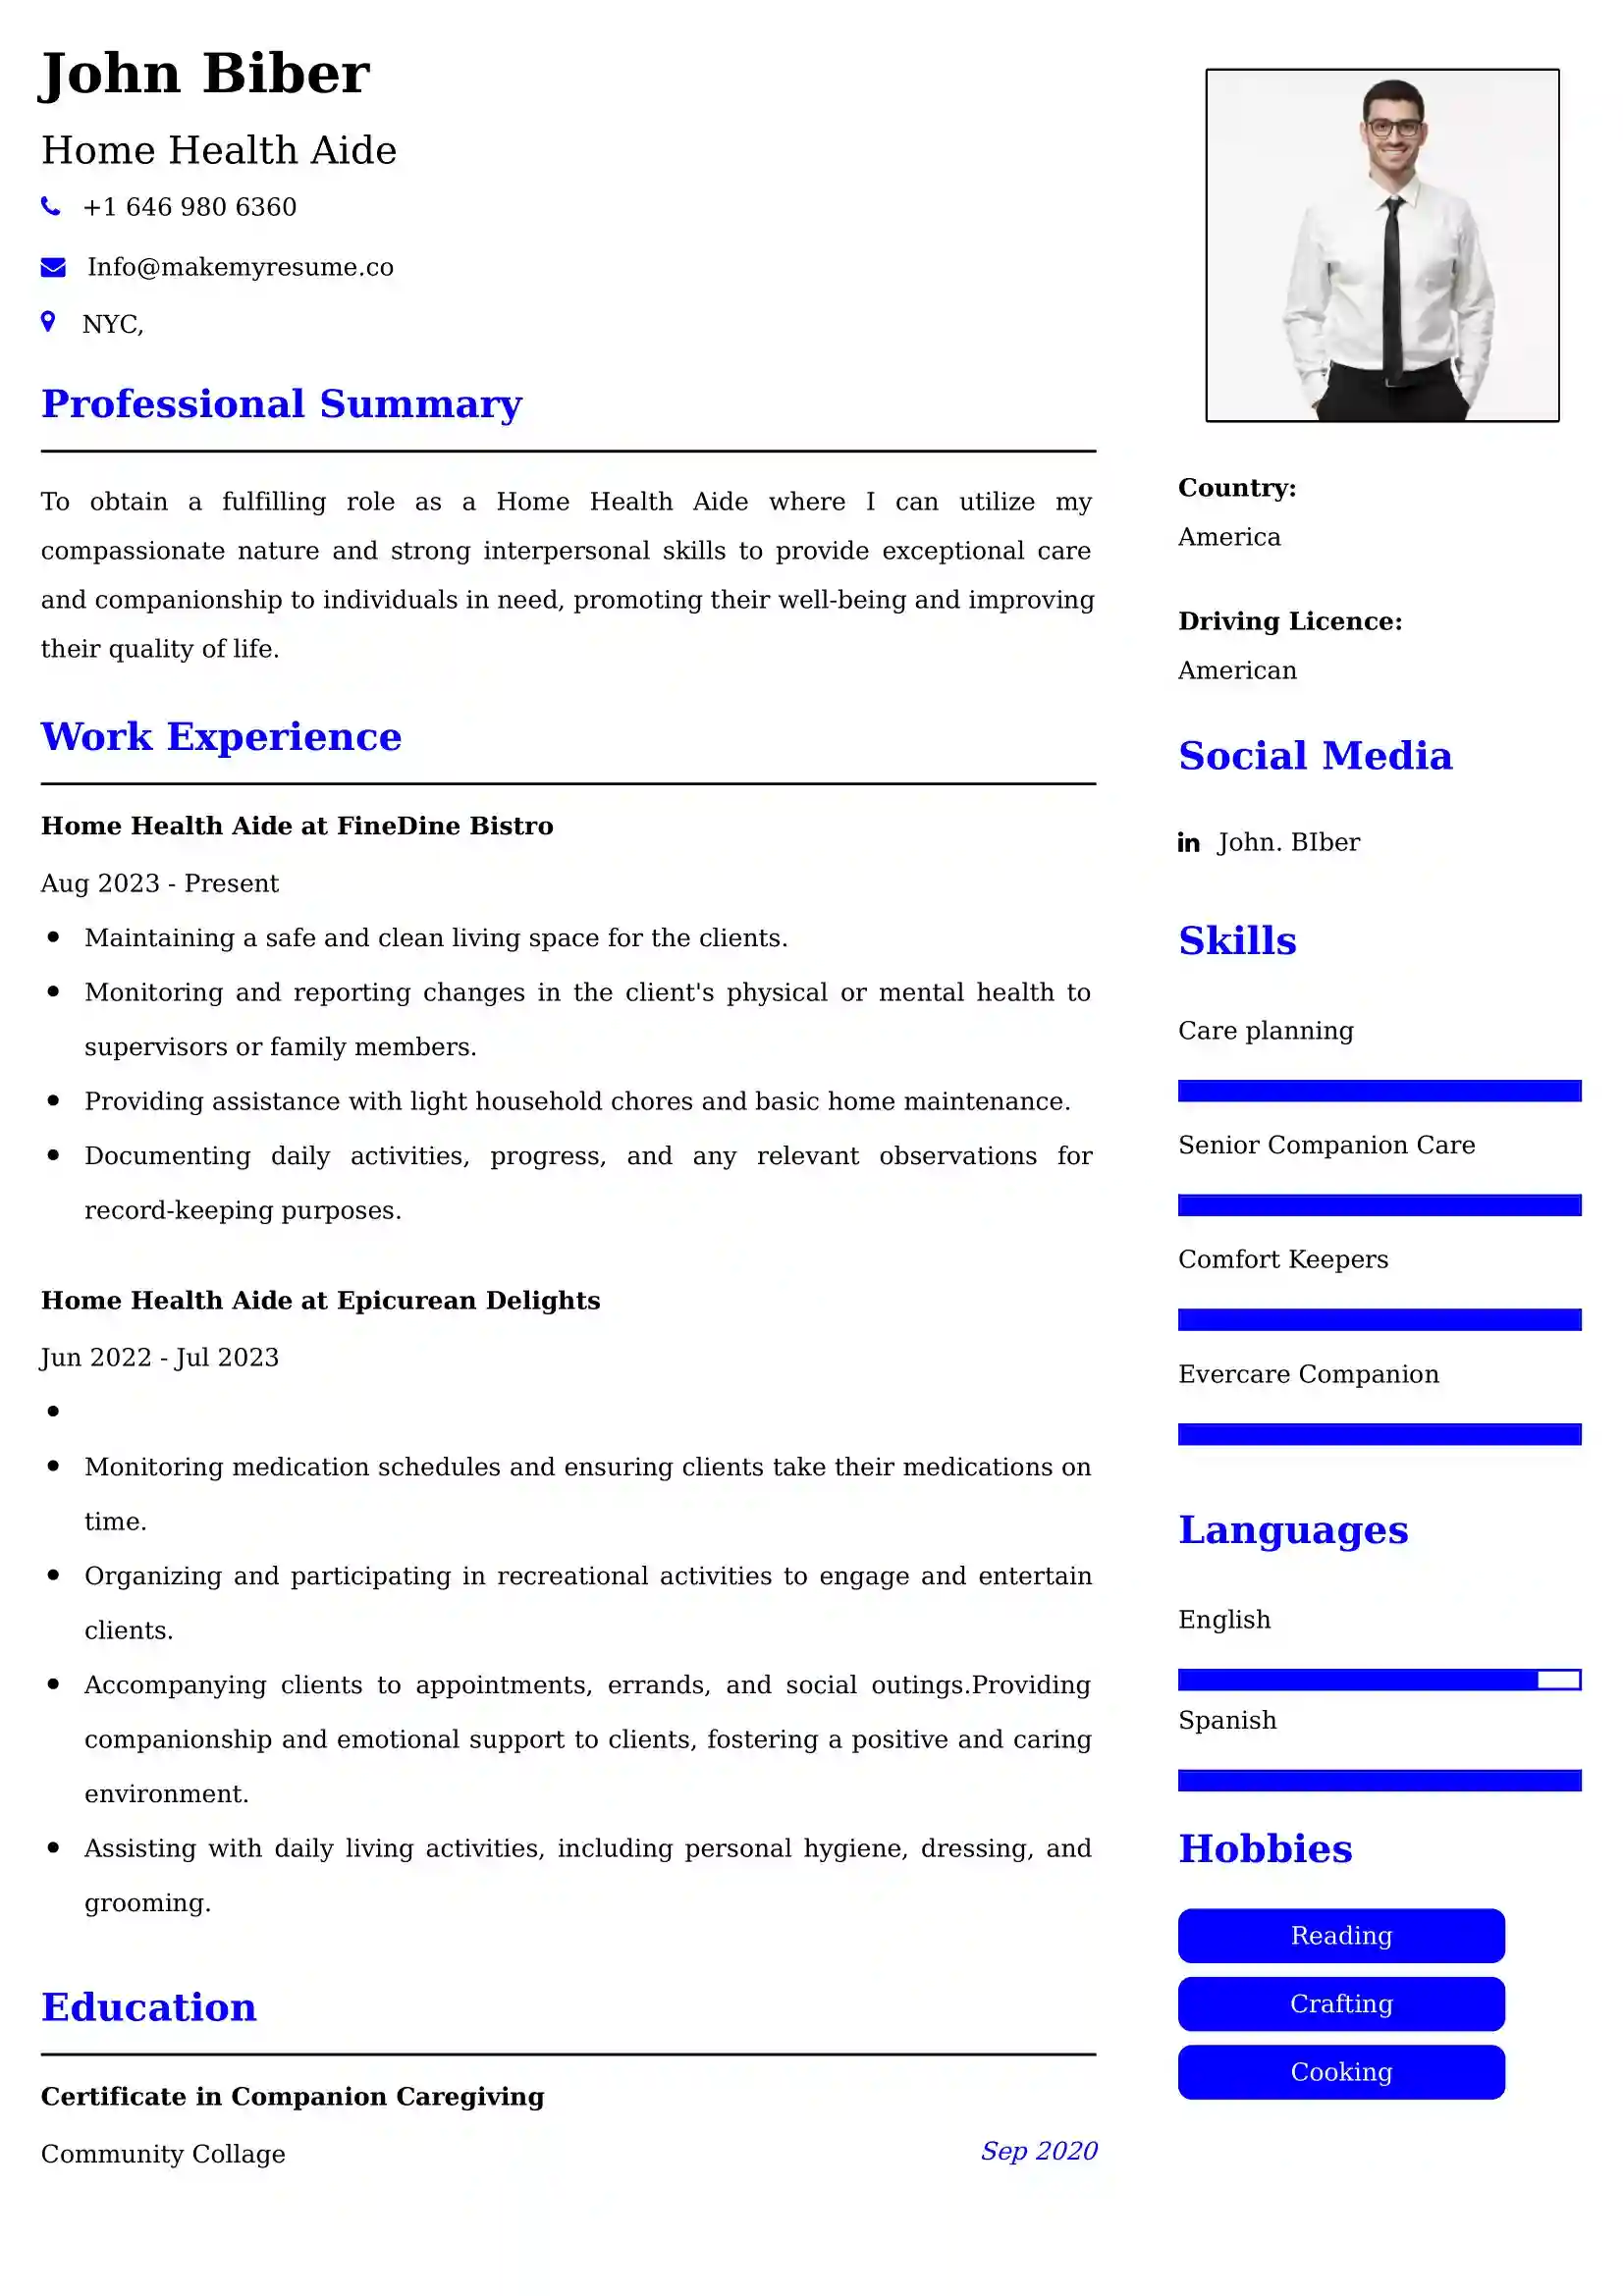 Home Health Aide Resume Examples - Brazilian Format, Latest Template